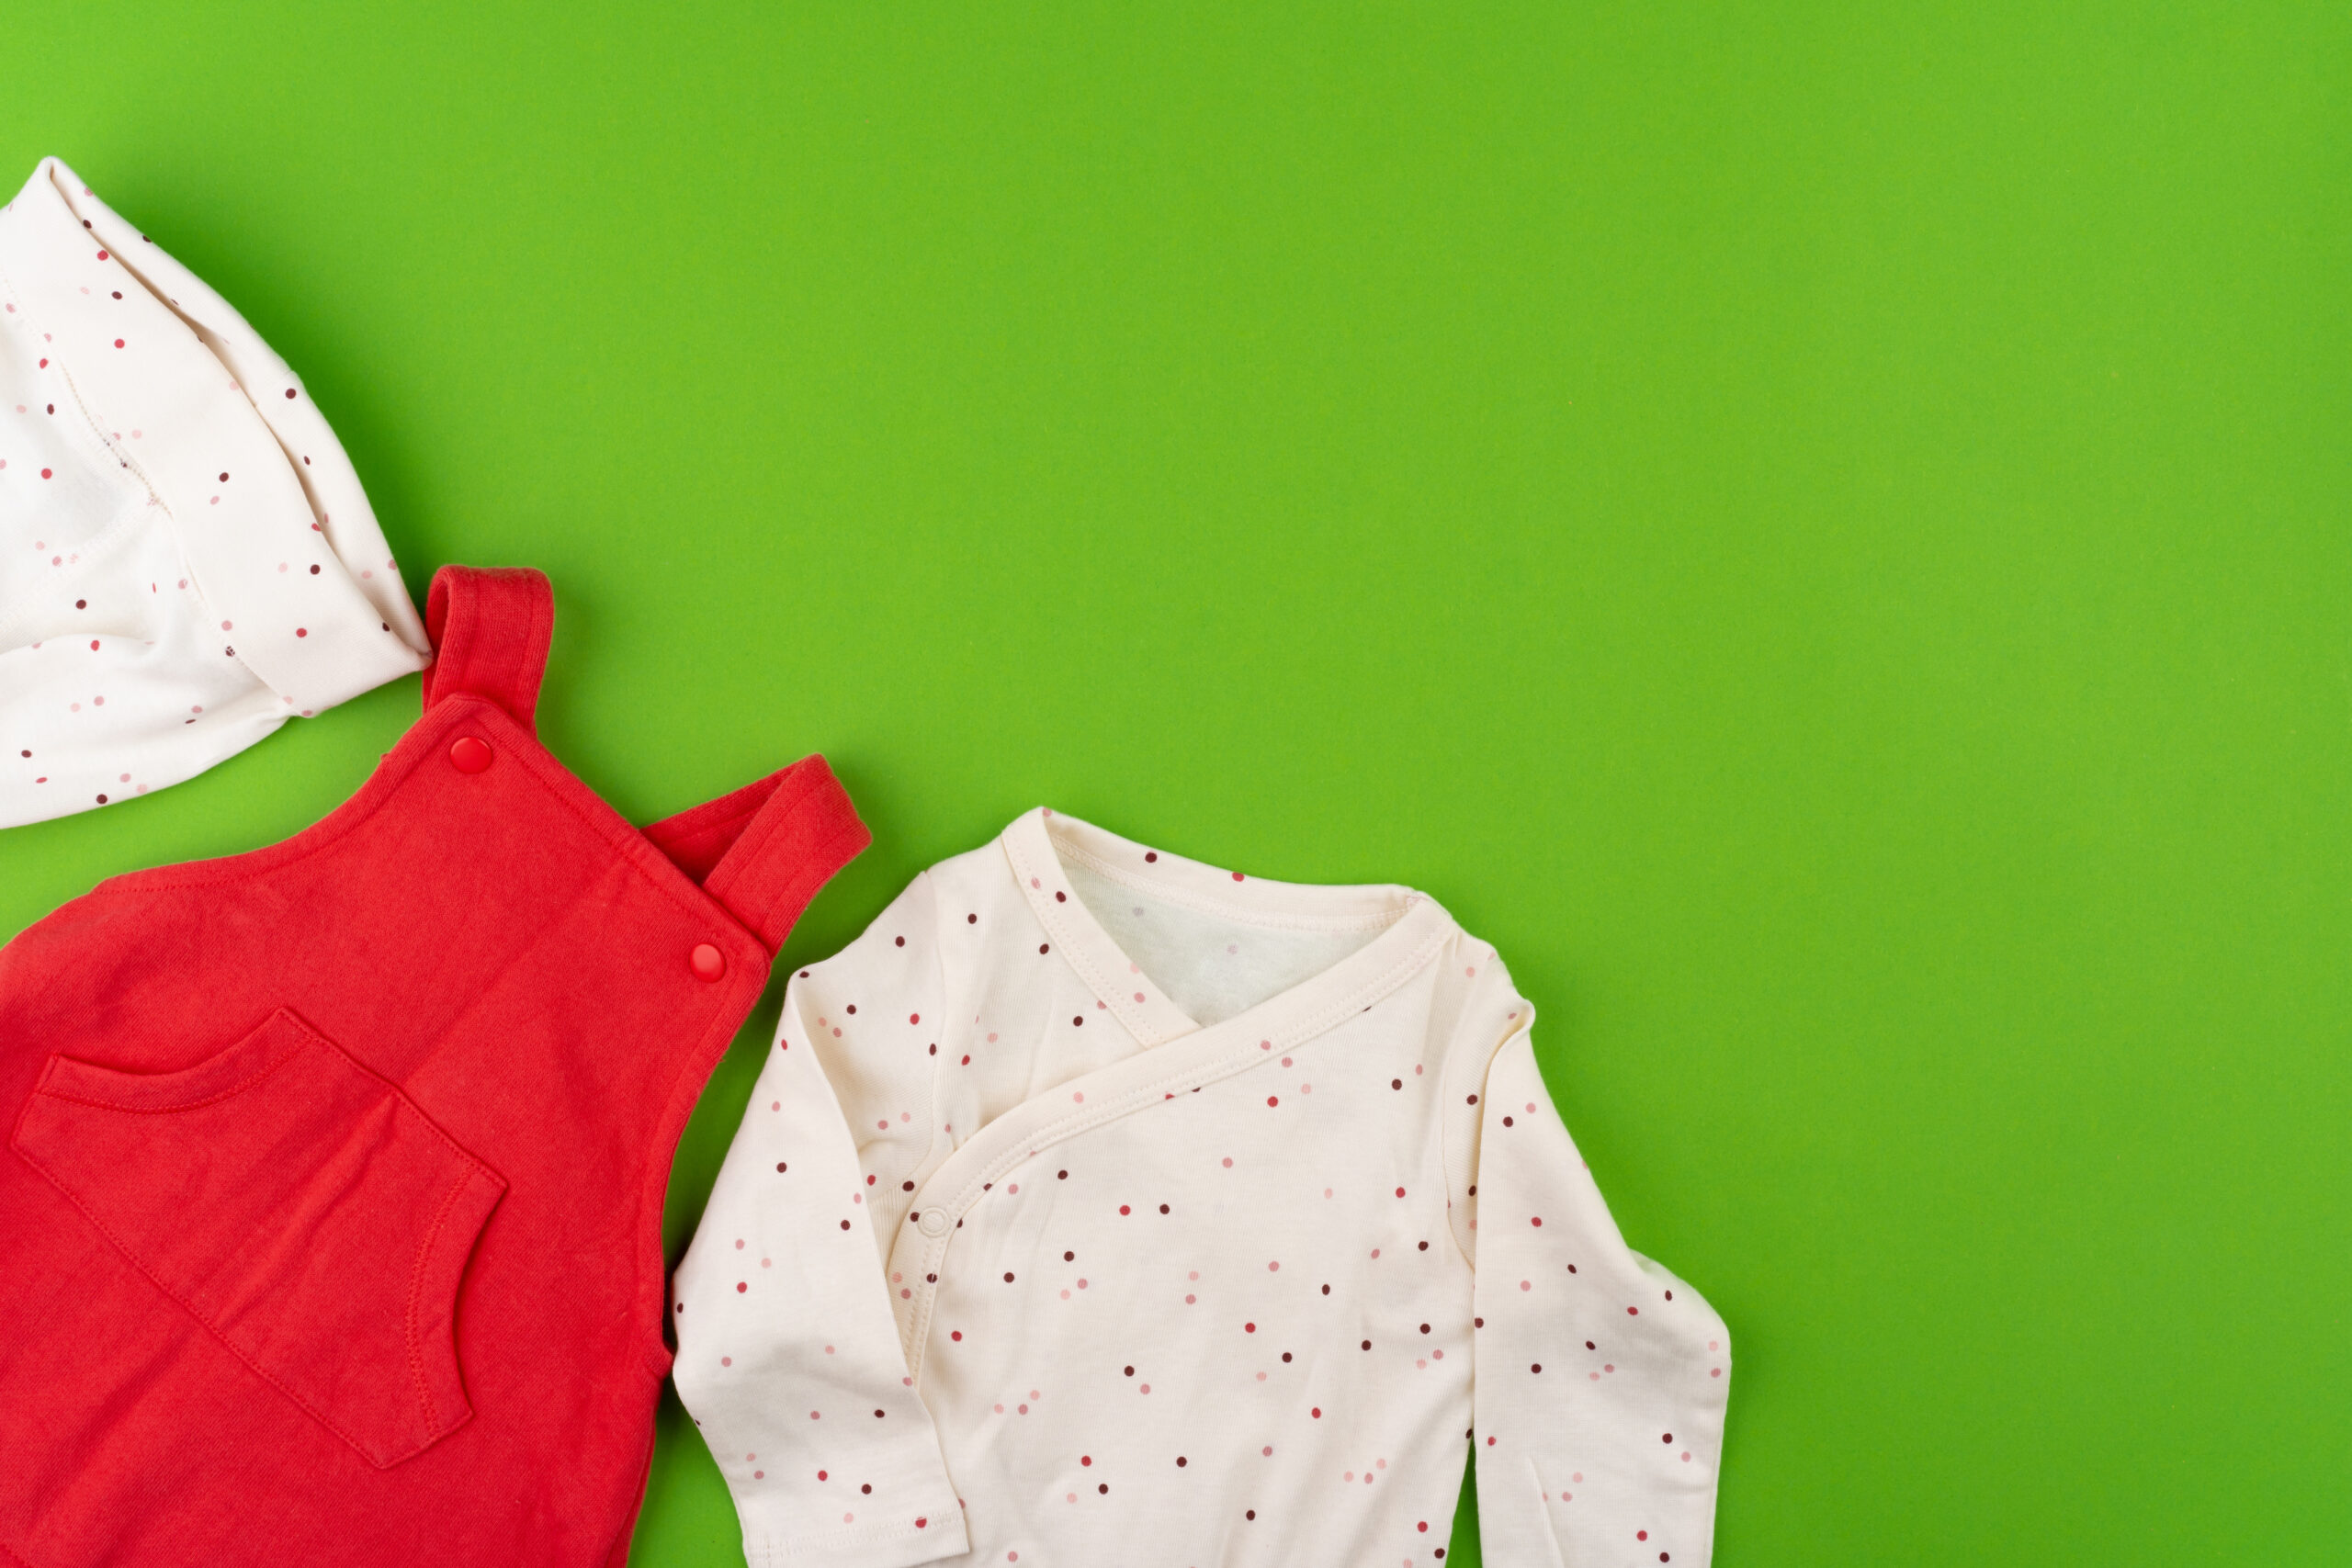 Top view of baby clothes on green background